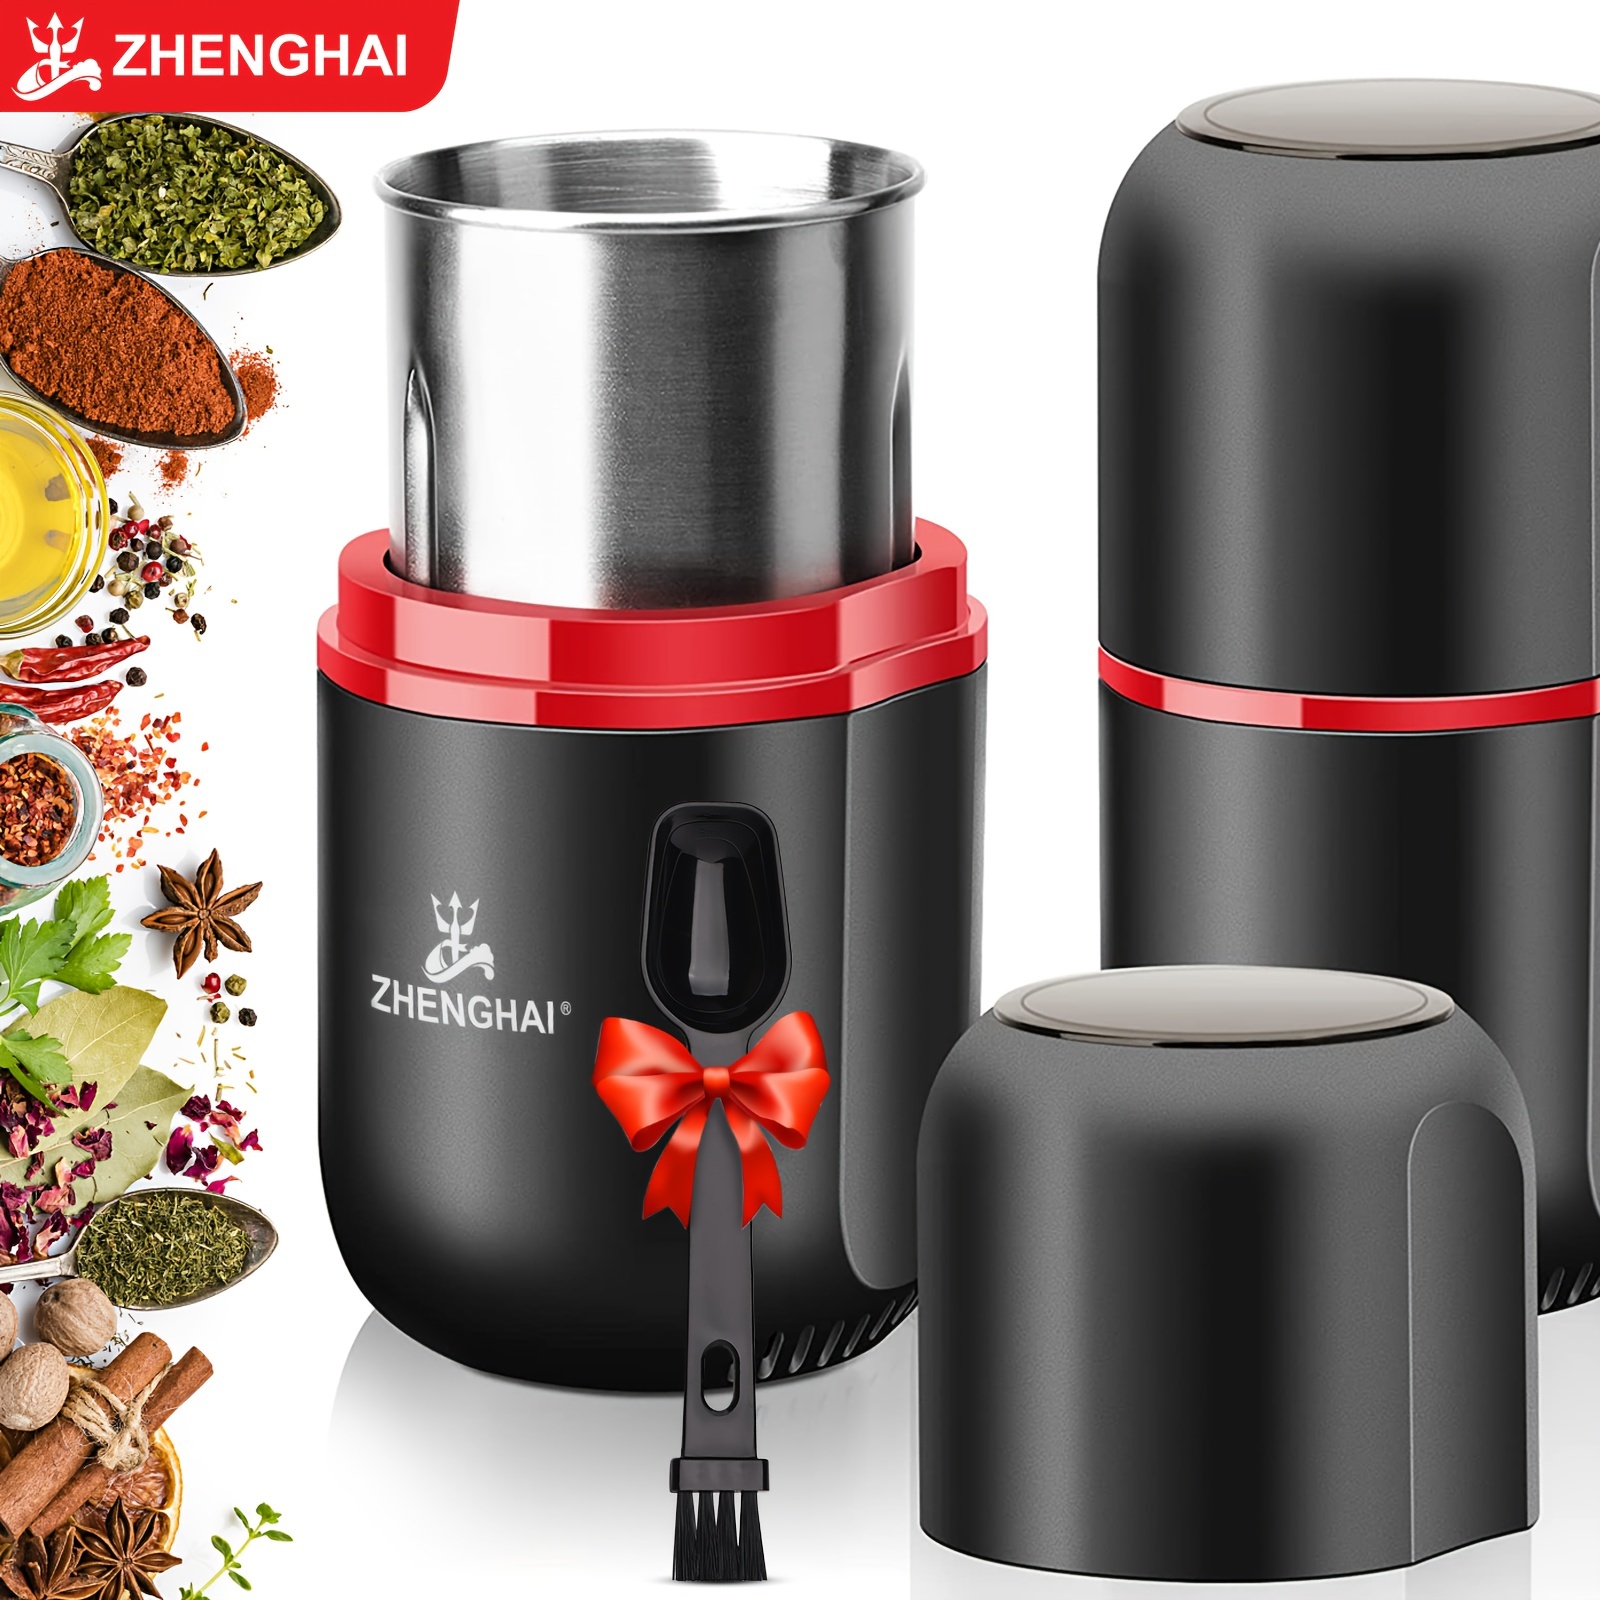 ZHENGHAI 4.23oz Large Capacity Electric Spice & Herb Grinder - Fast  Grinding For Coffee Bean, Nuts, Dry Spices, Herbs & Flower Buds - Includes  Cleanin